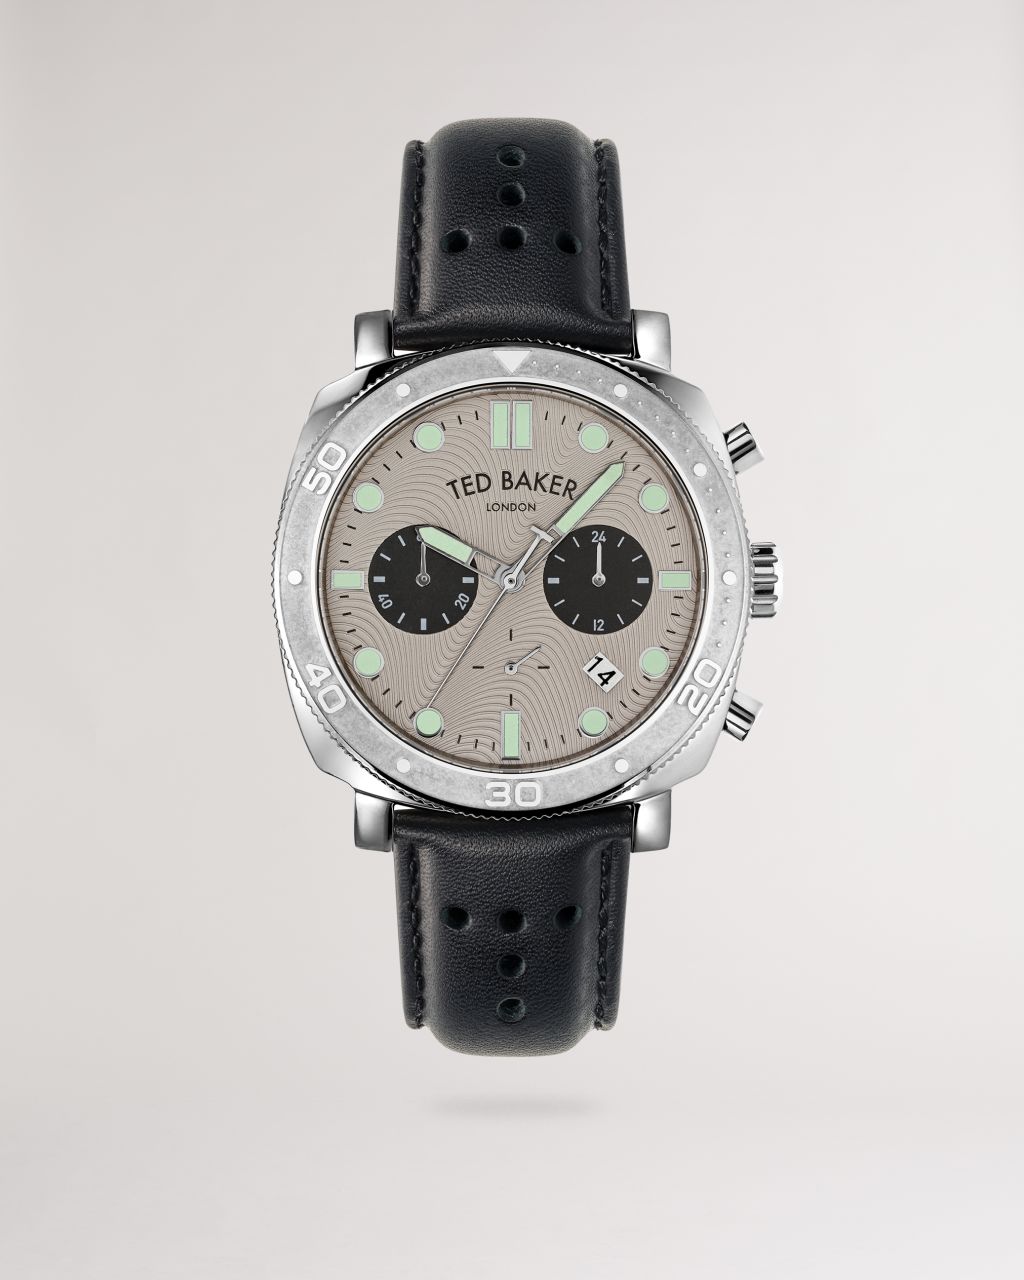 Ted Baker Leather Strap Watch in Black PLSITC, Men's Accessories